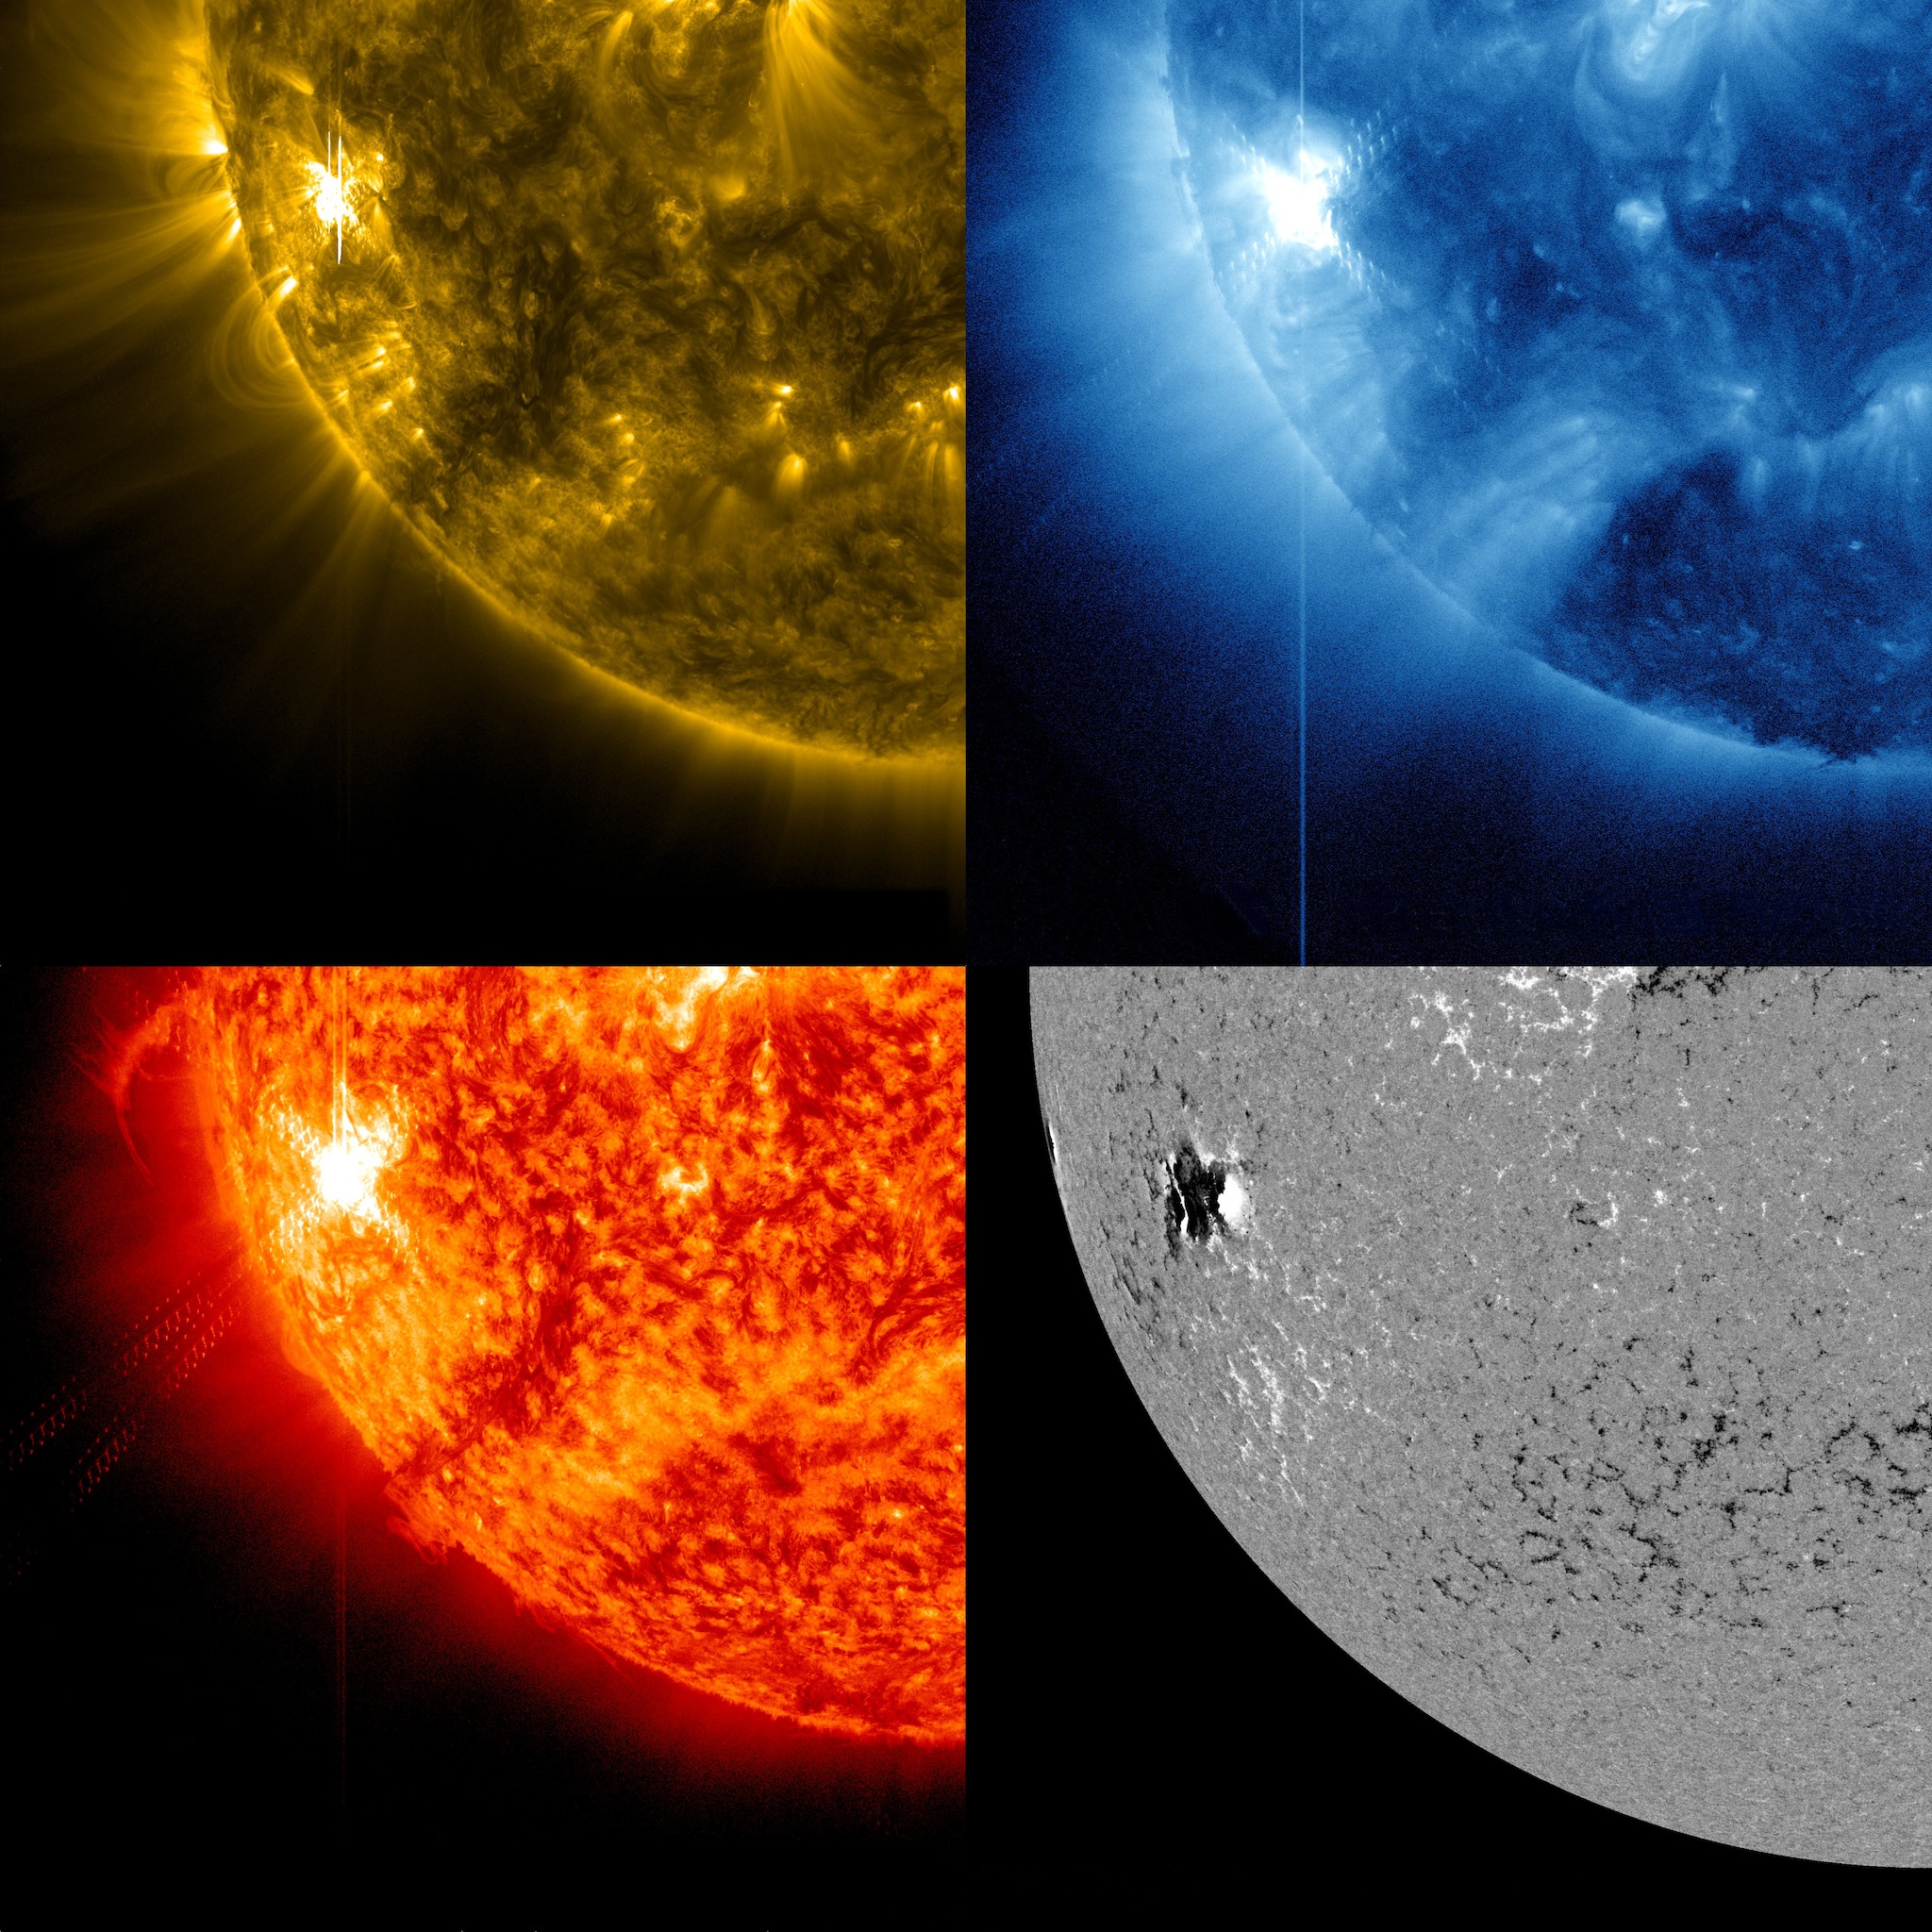 By observing the sun in a number of different wavelengths, NASA's telescopes can tease out different aspects of events on the sun. These four images of a solar flare on Oct. 22, 2012, show from the top left, and moving clockwise: light from the sun in the 171 angstrom wavelength, which shows the structure of loops of solar material in the sun's atmosphere, the corona; light in 335 angstroms, which highlights light from active regions in the corona; a magnetogram, which shows magnetically active regions on the sun; light in the 304 wavelength, which shows light from the region of the sun's atmosphere where flares originate. Credit: NASA/SDO/GSFC